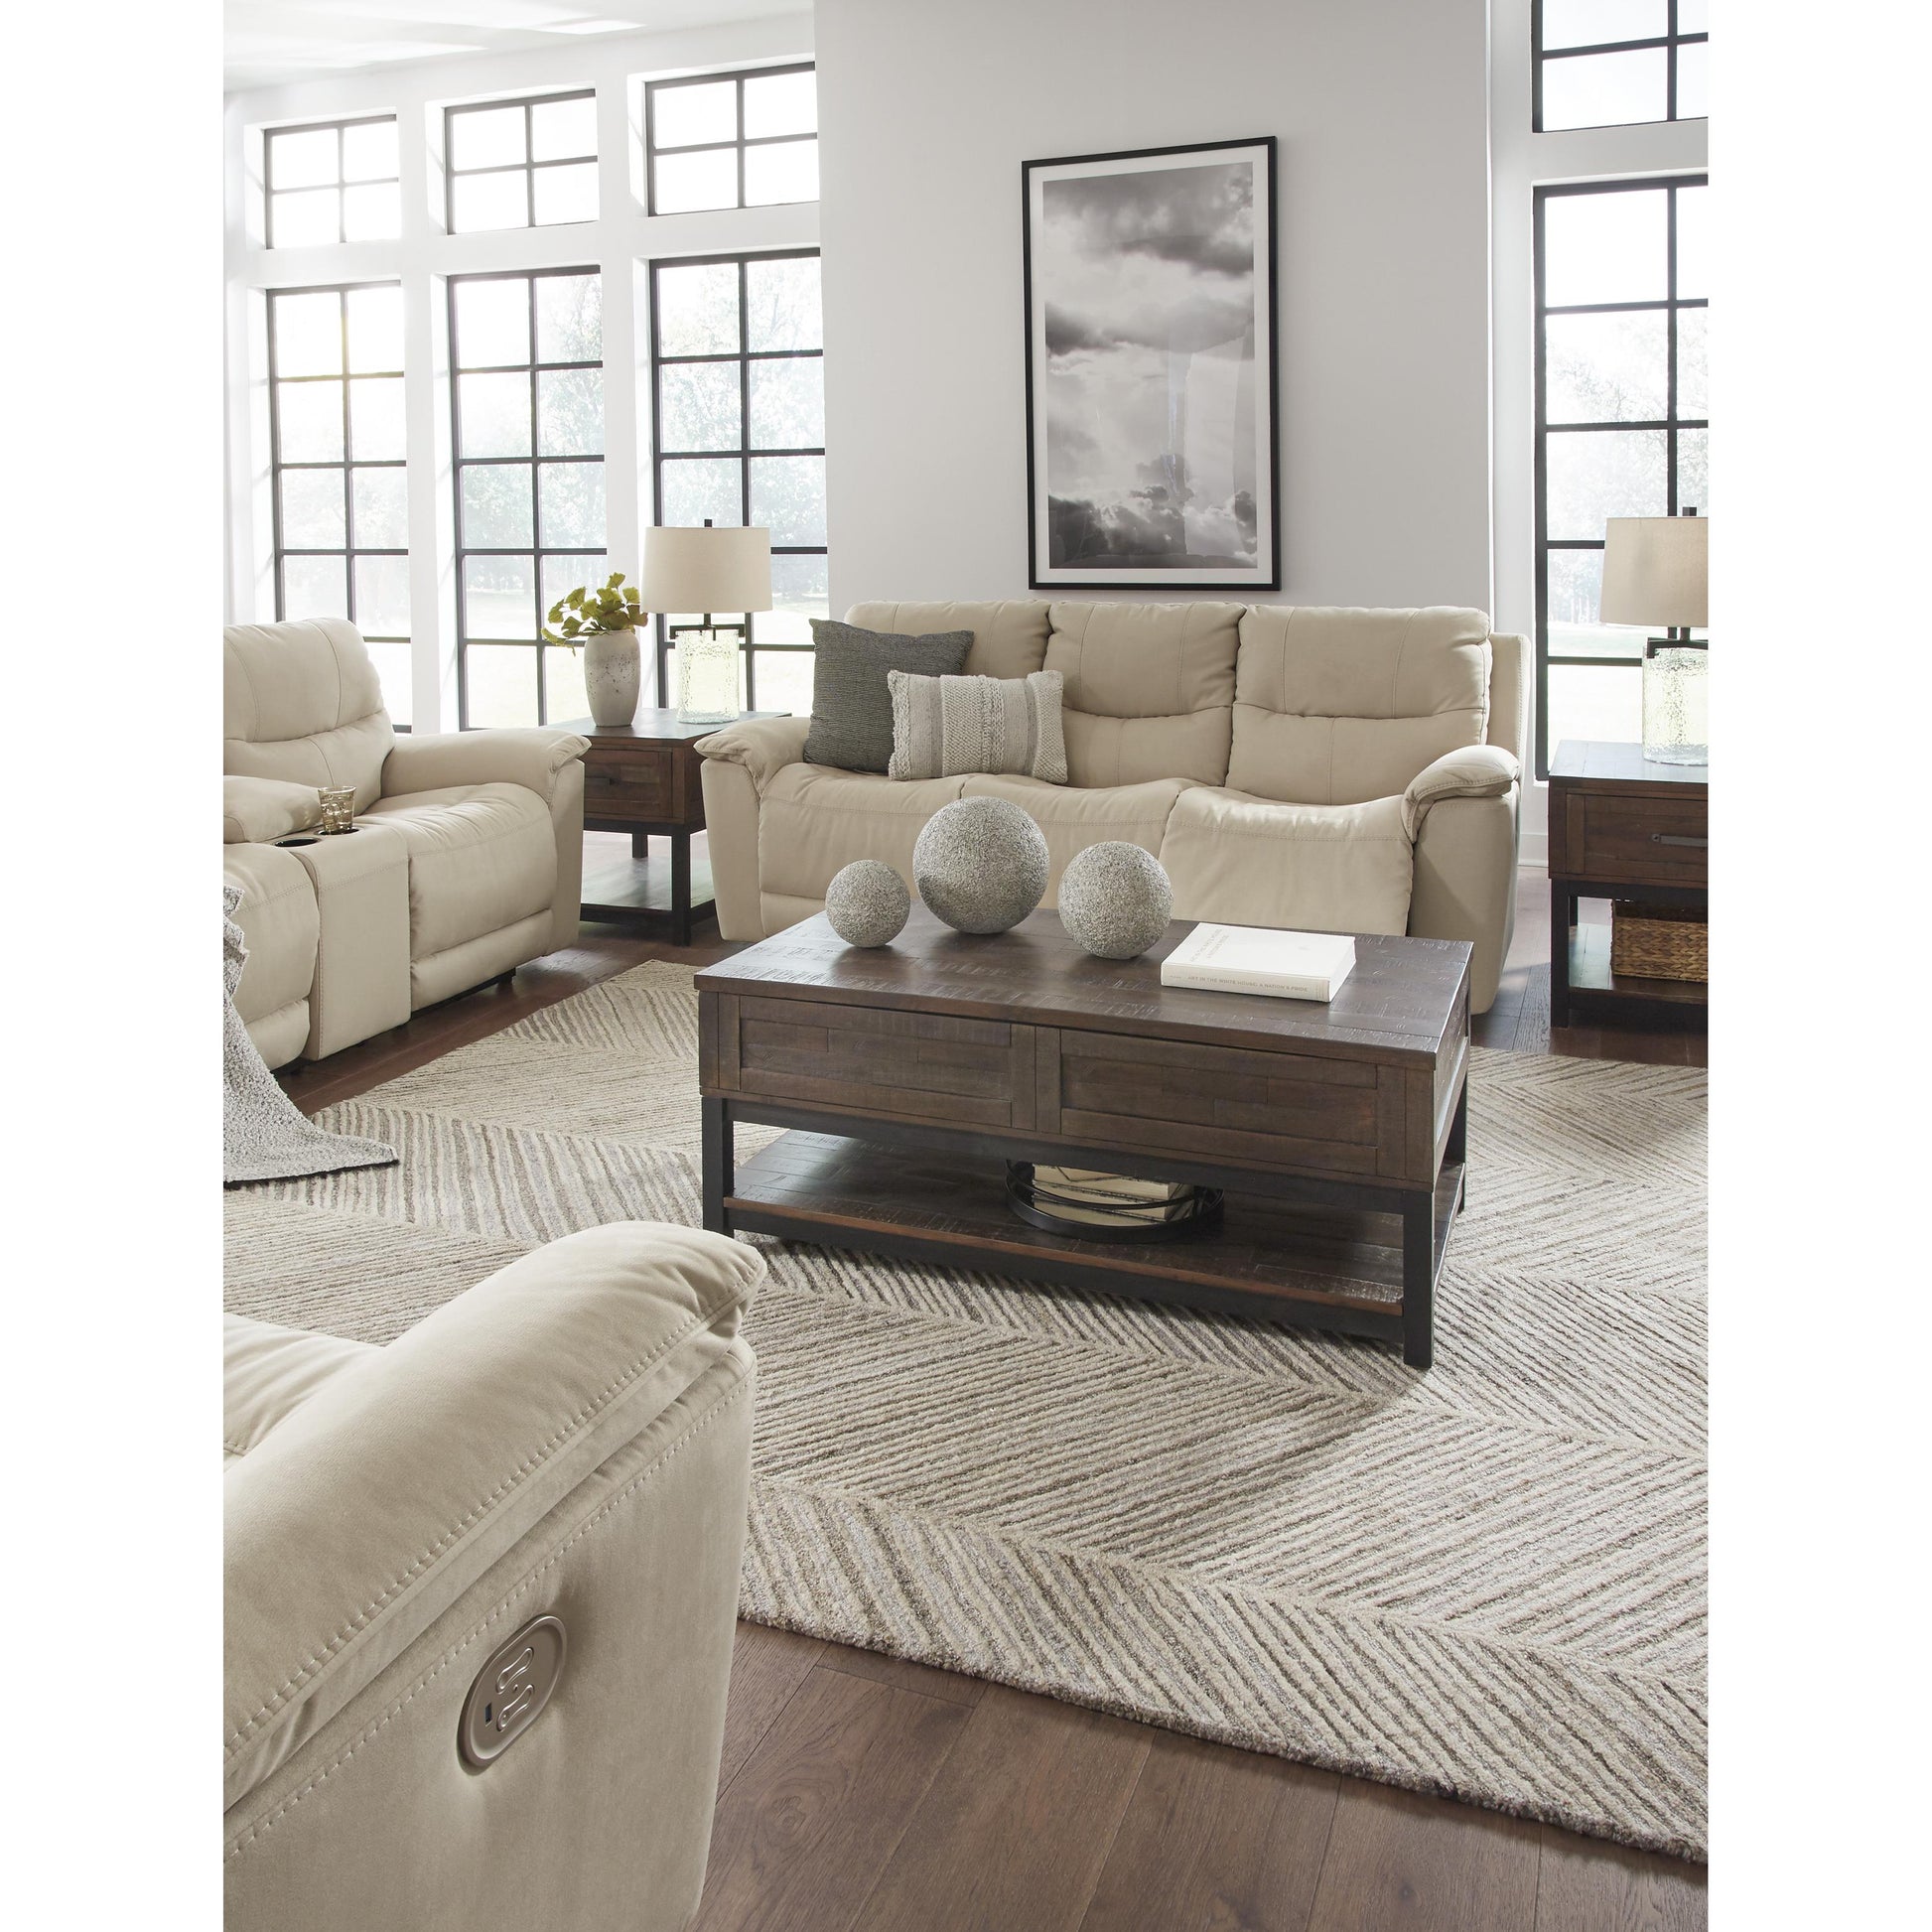 Signature Design by Ashley Next-Gen Gaucho Power Reclining Leather Look Sofa 6080715 IMAGE 10